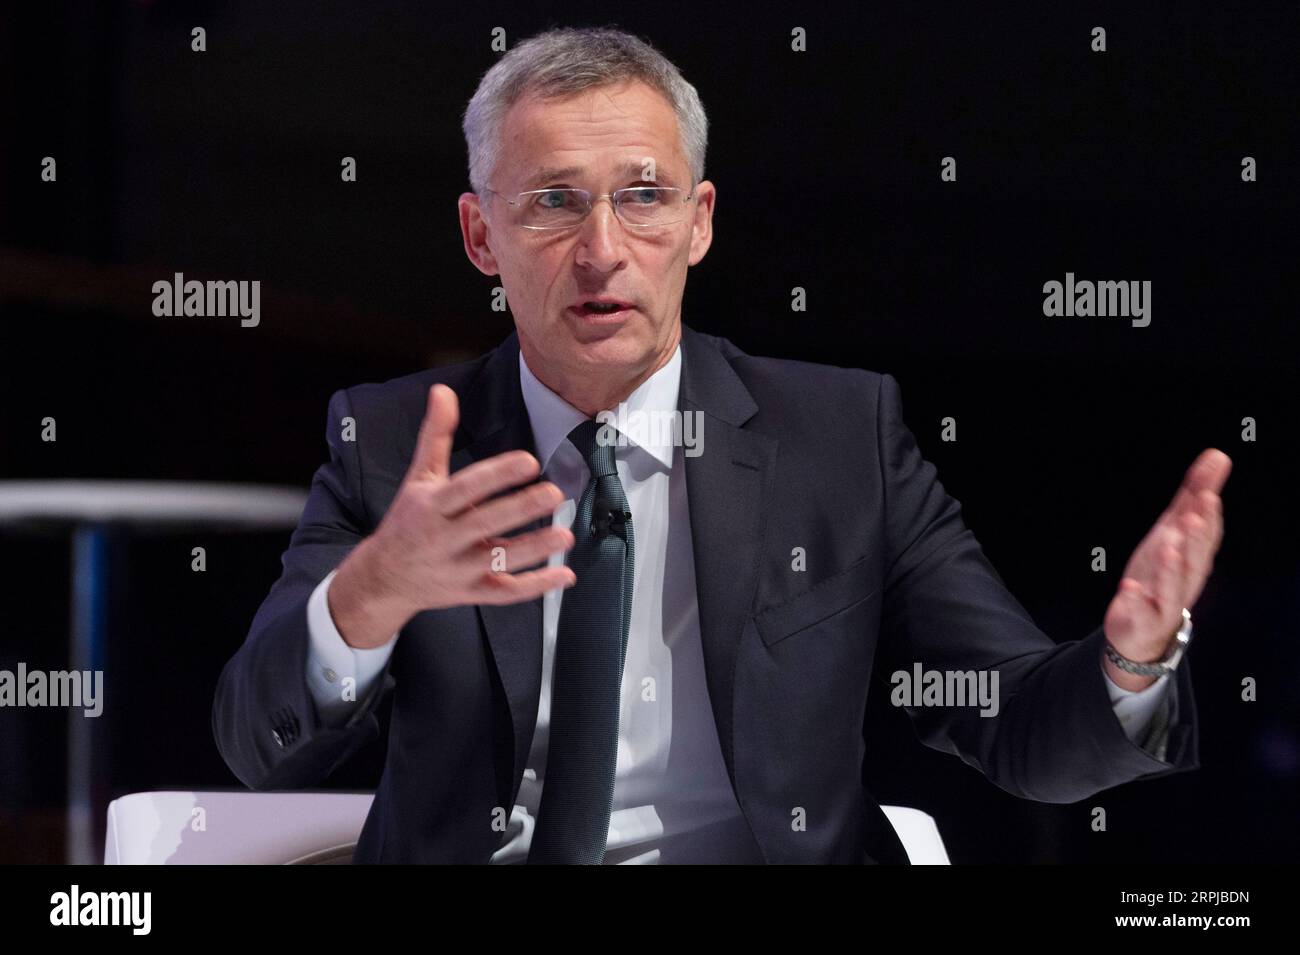 191204 -- LONDON, Dec. 4, 2019 Xinhua -- NATO Secretary General Jens Stoltenberg makes a speech at the NATO Engages event in London, Britain on Dec. 3, 2019. Photo by Ray Tang/Xinhua BRITAIN-LONDON-NATO ENGAGES-JENS STOLTENBERG-SPEECH PUBLICATIONxNOTxINxCHN Stock Photo